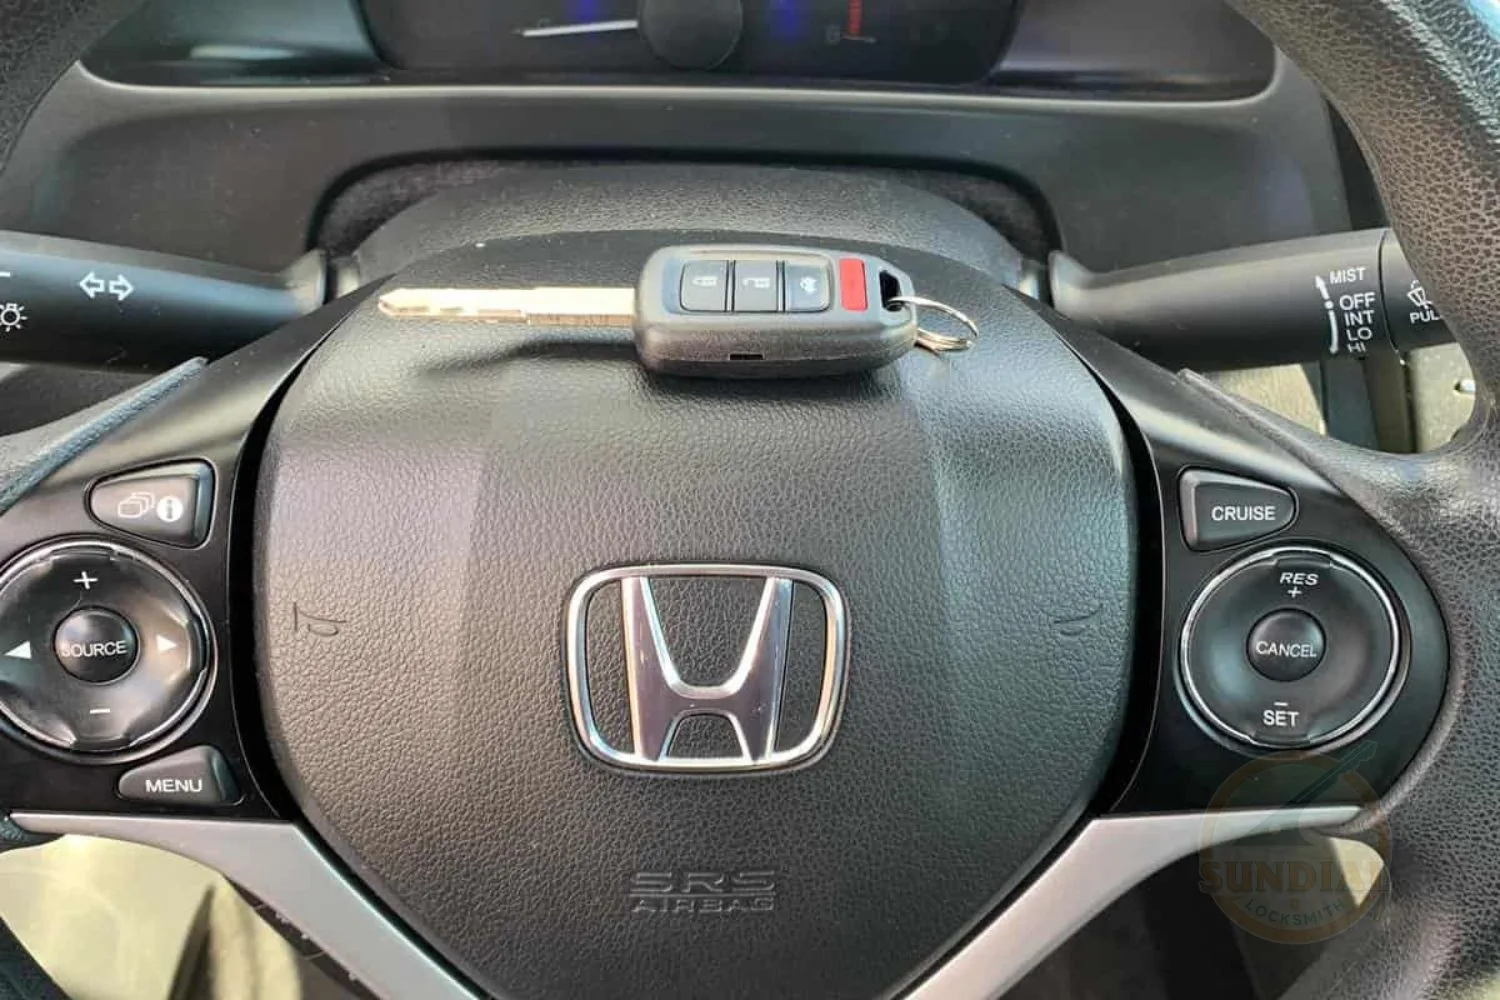 A Honda car key fob resting on the center of a Honda steering wheel with control buttons.